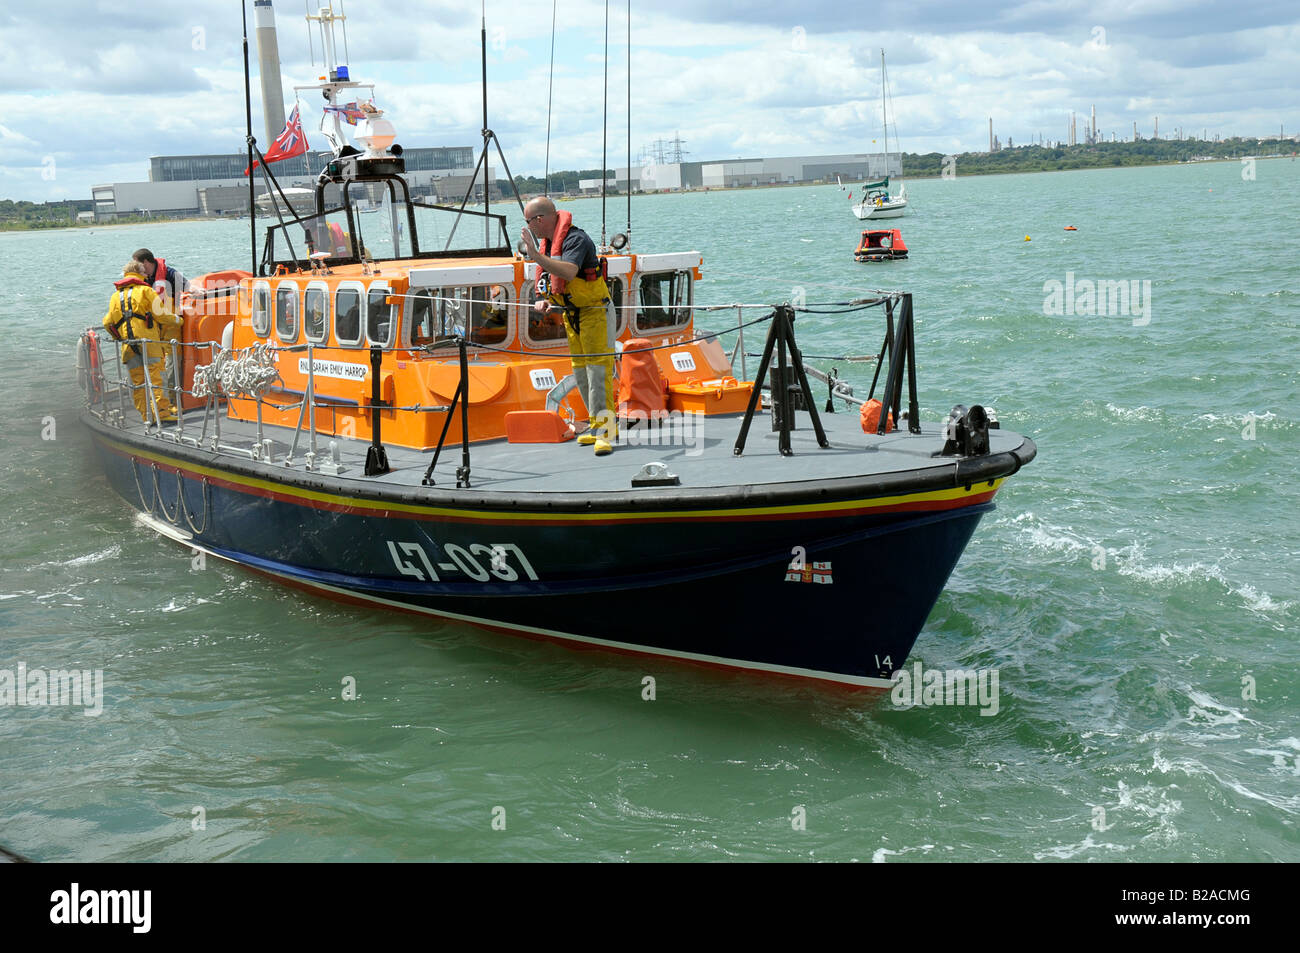 Calshot's Lifeboat, a 24ton self-righting Tyne class Stock Photo